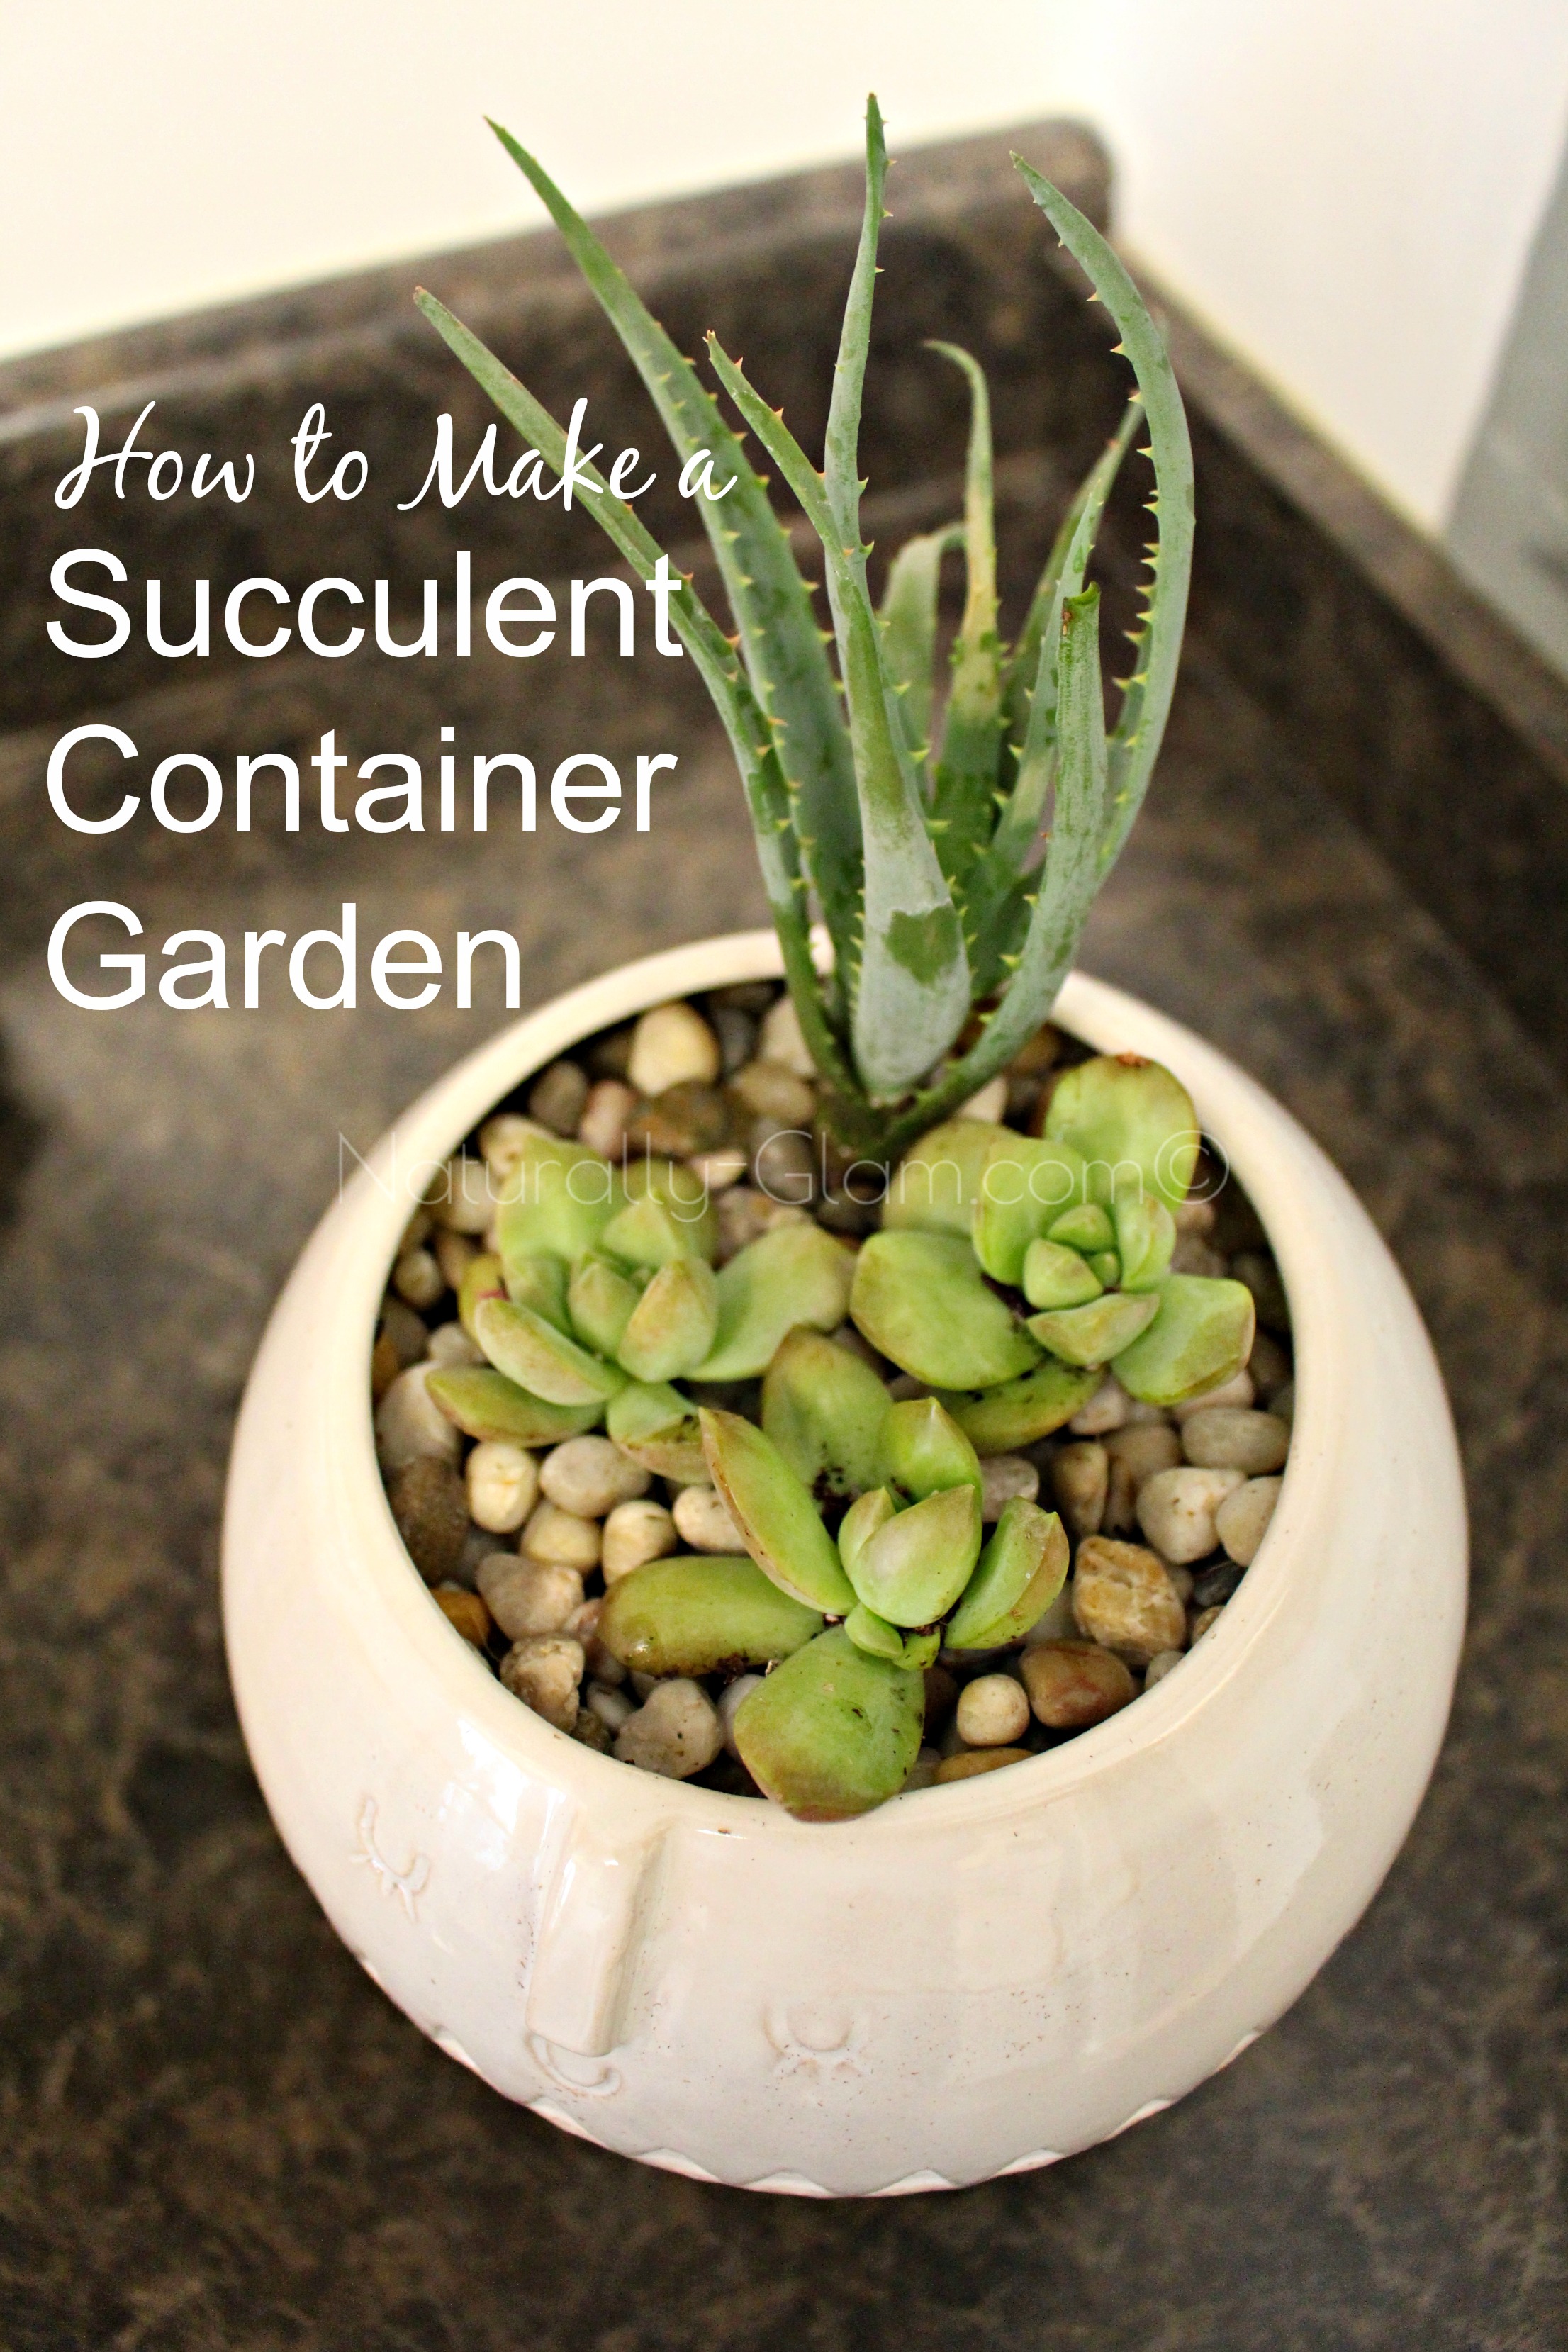 How to Make a Succulent Container Garden